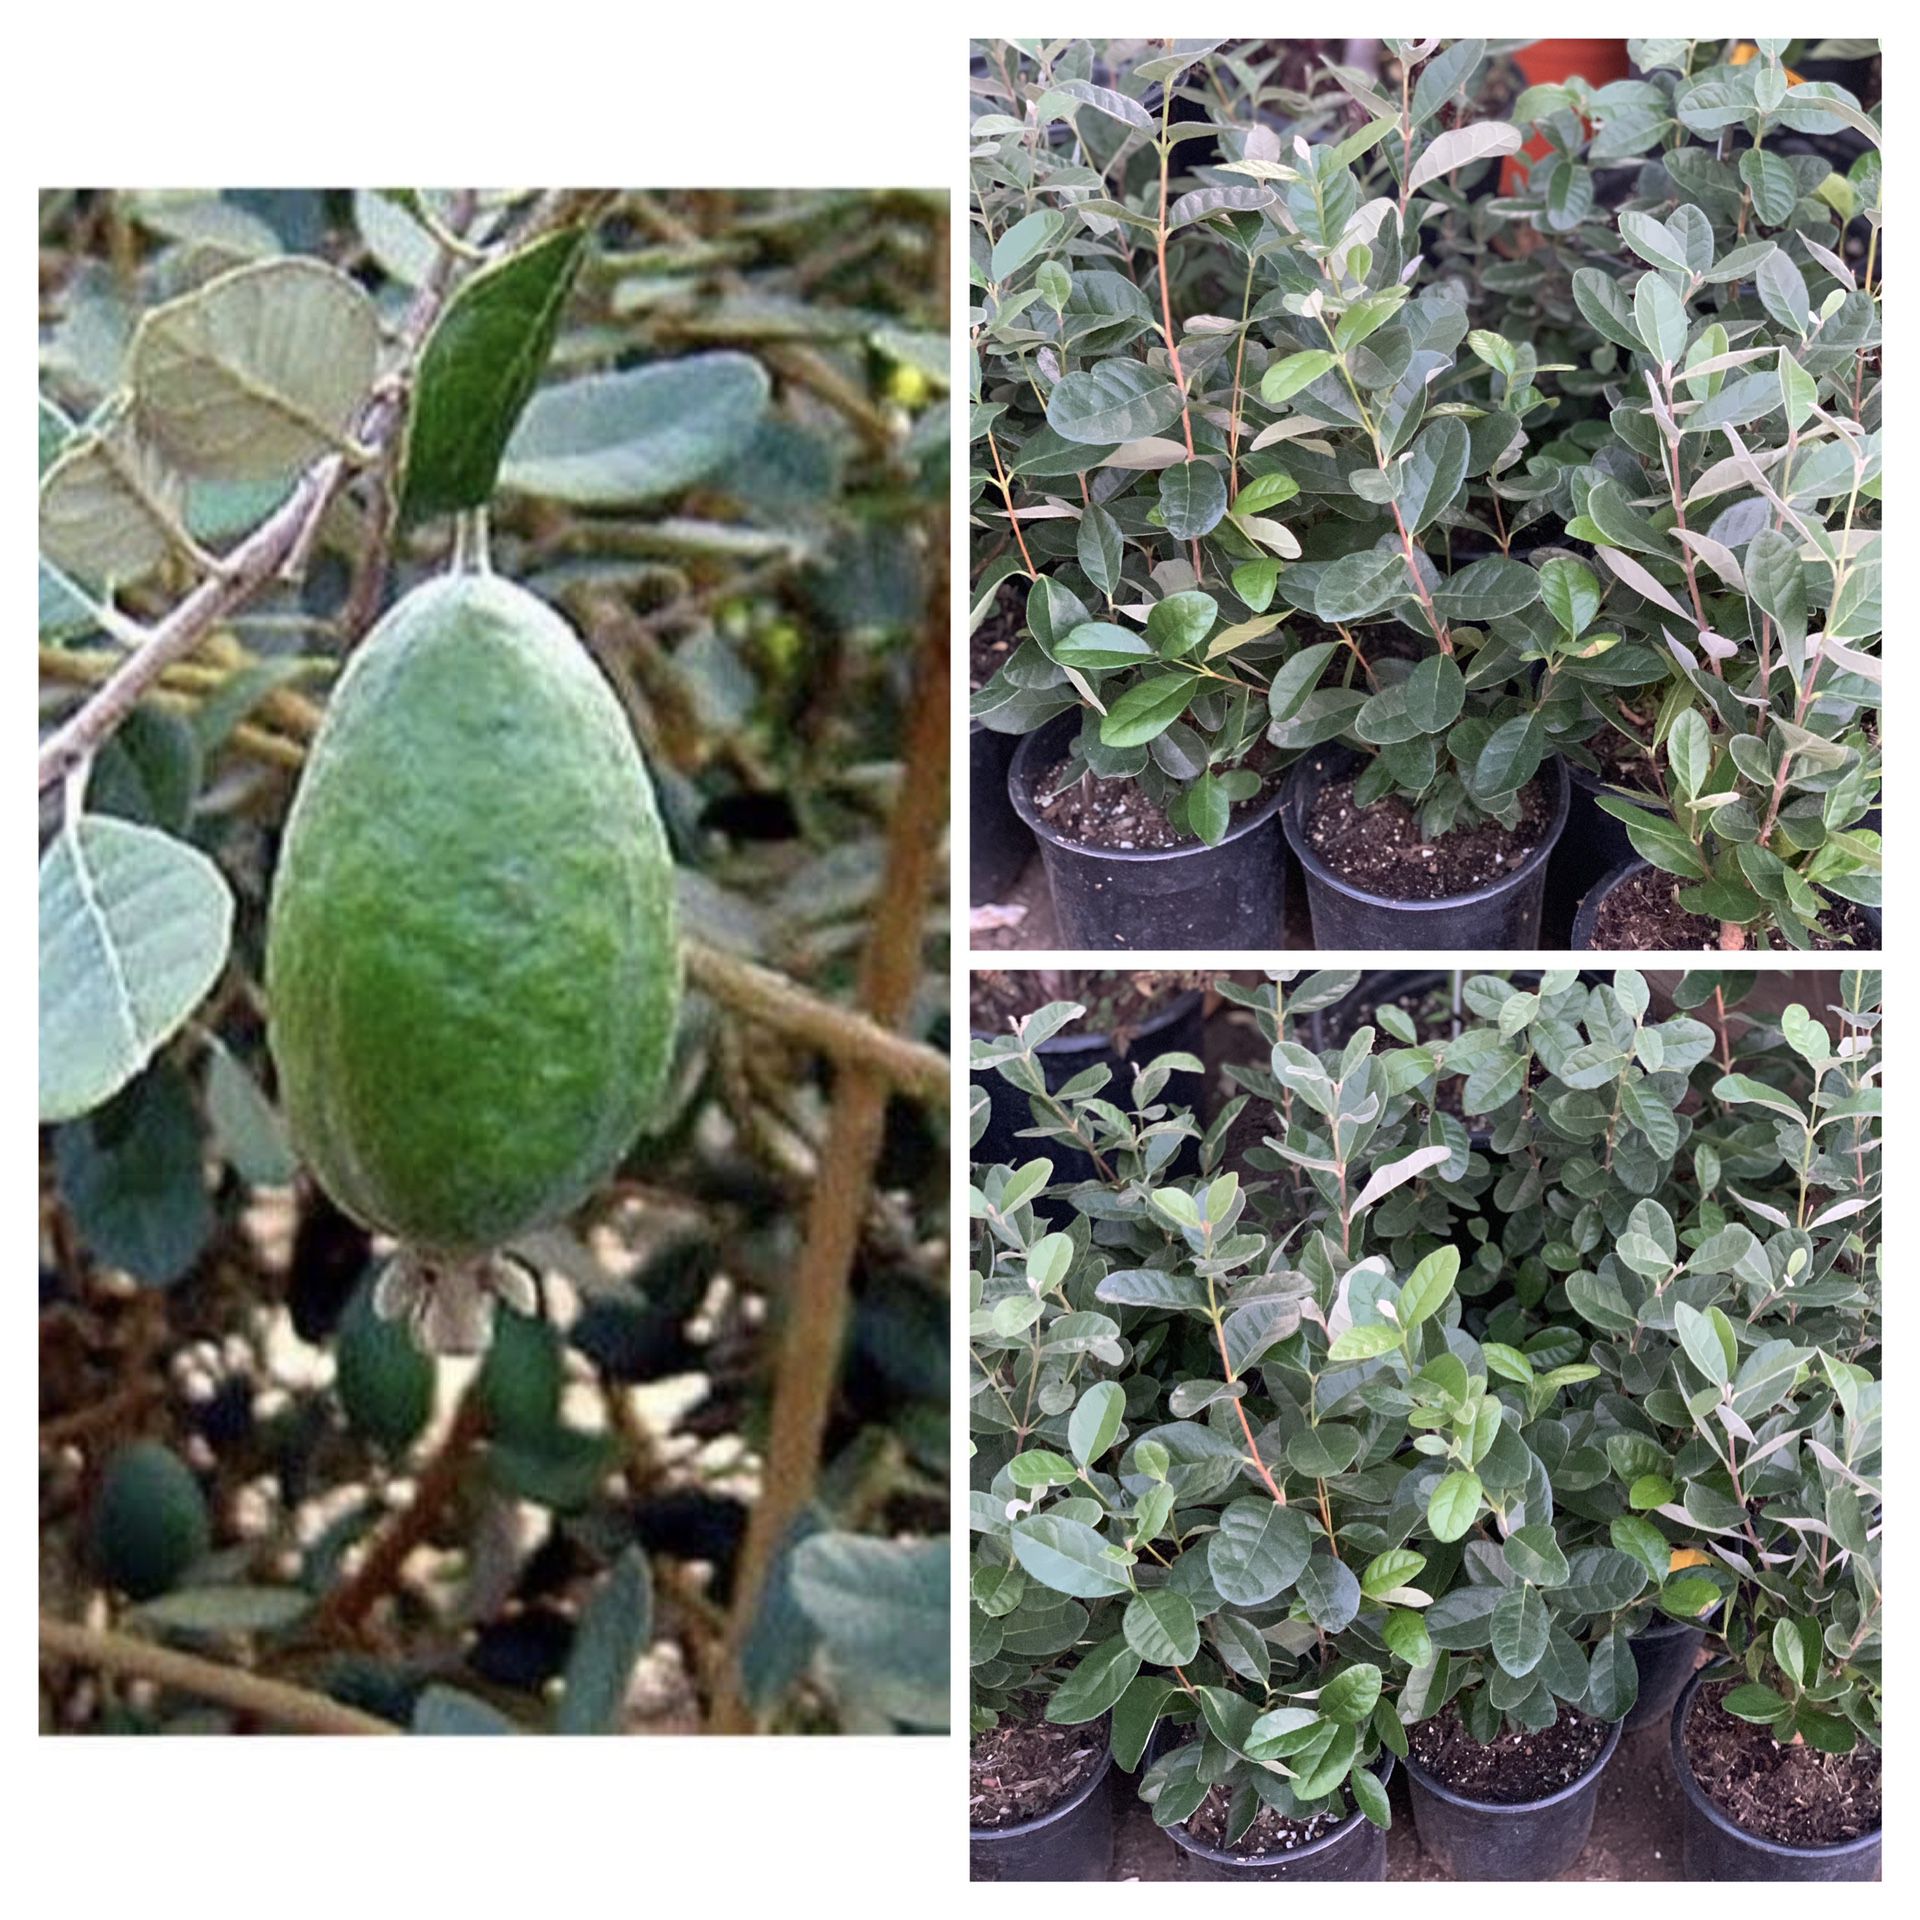 $25 Feijoa Sellowiana Pineapple Guava Live Fruit Tree Plant Bush Shrub One Gallon Pot approximately 1 to 2 ft tall  CASH ONLY  $25 Each